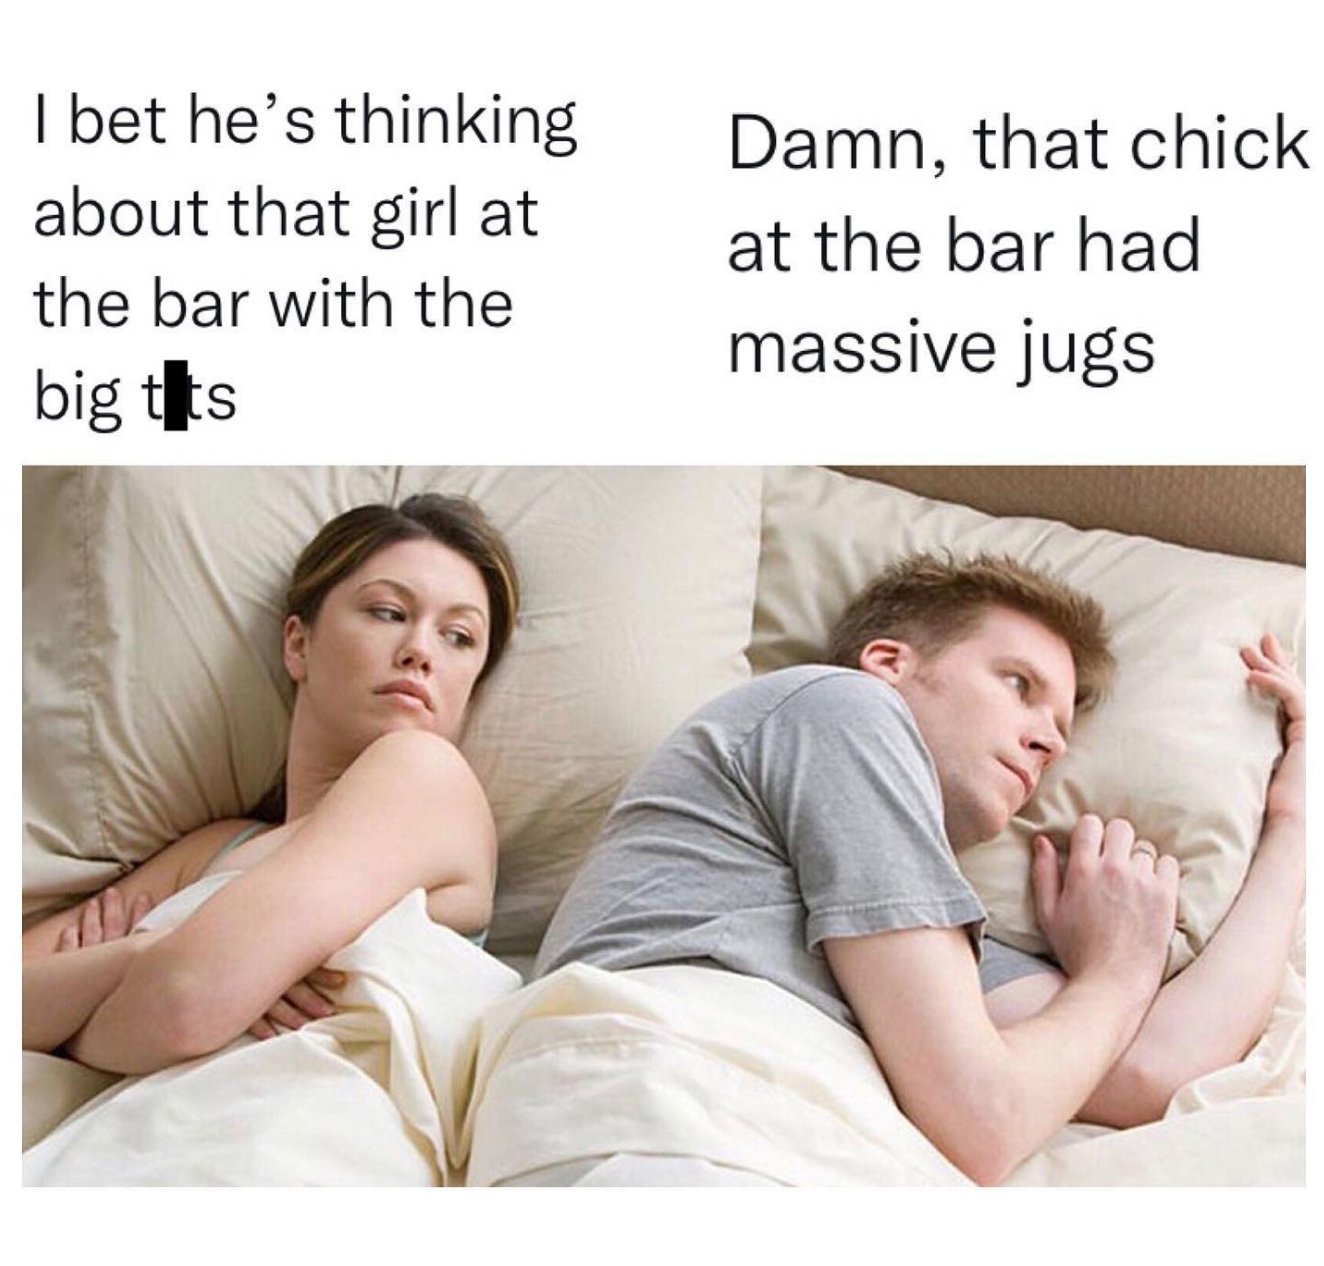 i bet he's thinking about that girl at the bar with the big tits, damn, that chick at the bar had massive jugs